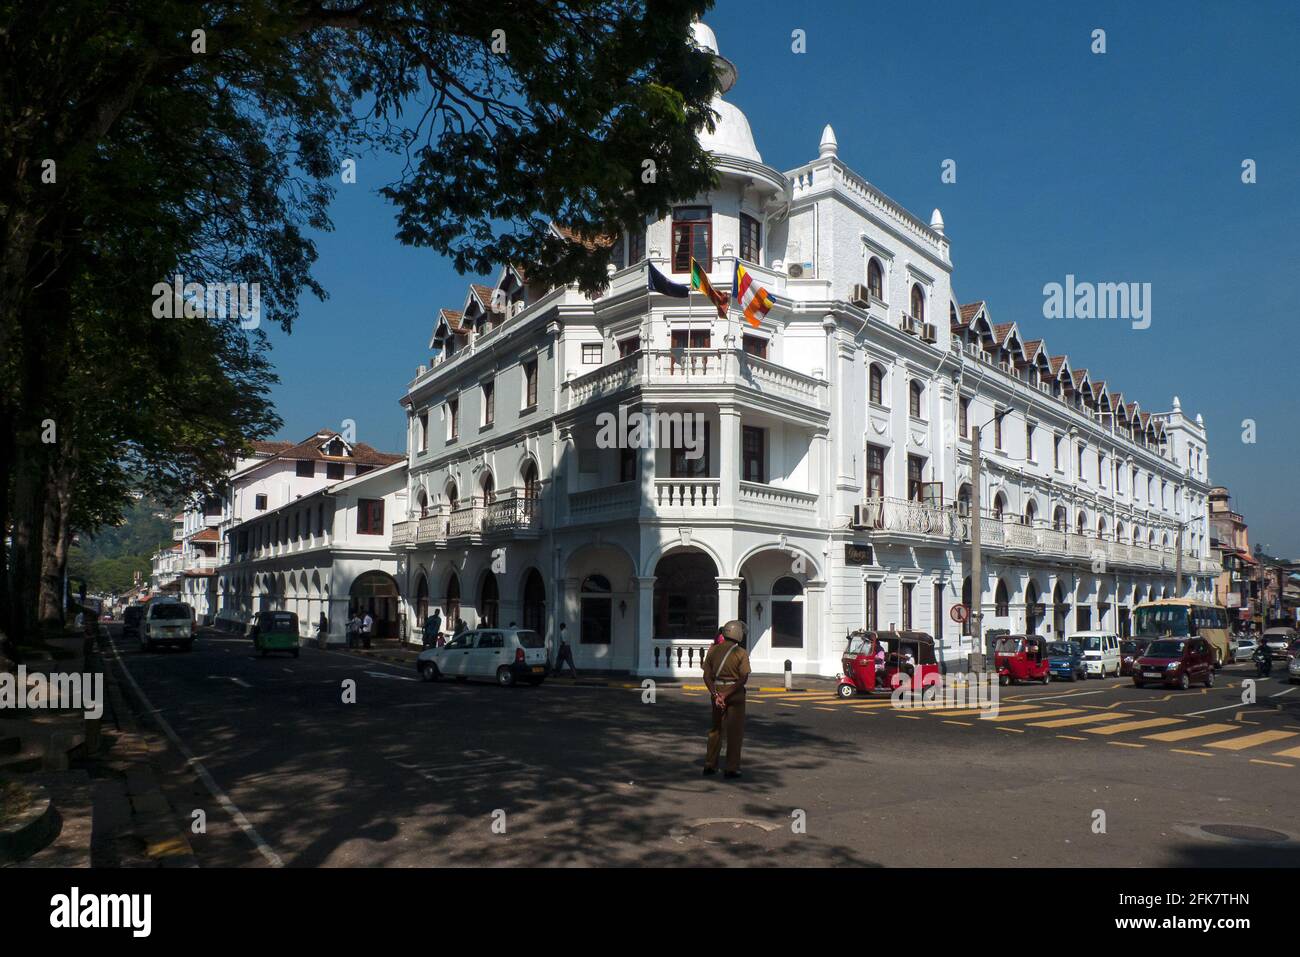 Kandy, Sri Lanka: a colonial-style building in the center of the city Stock Photo